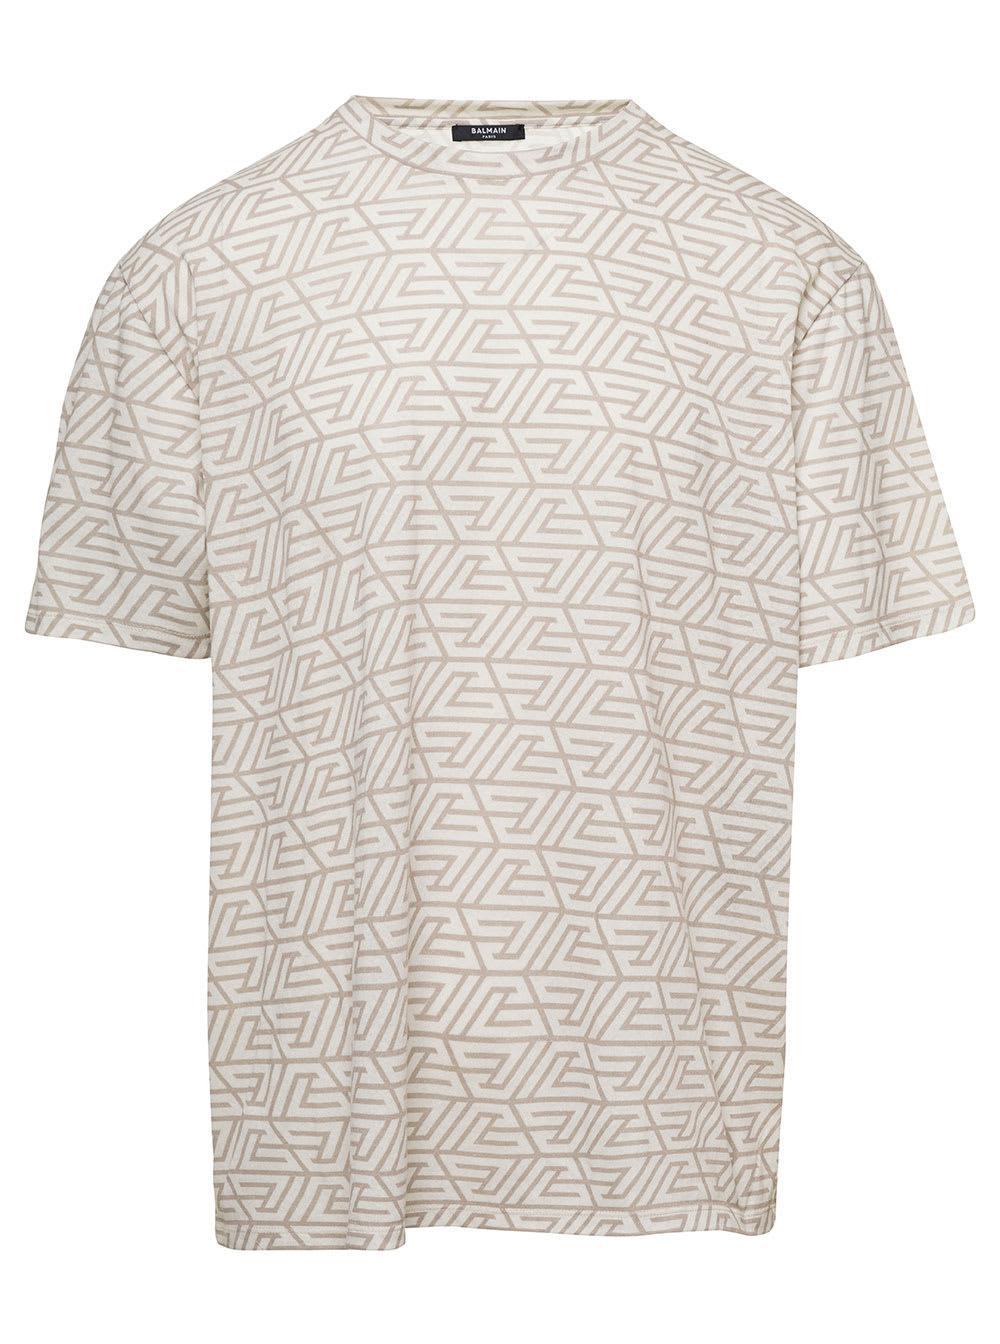 Buy All Over Monogram Flocked T-Shirt Men's Shirts from Buyers